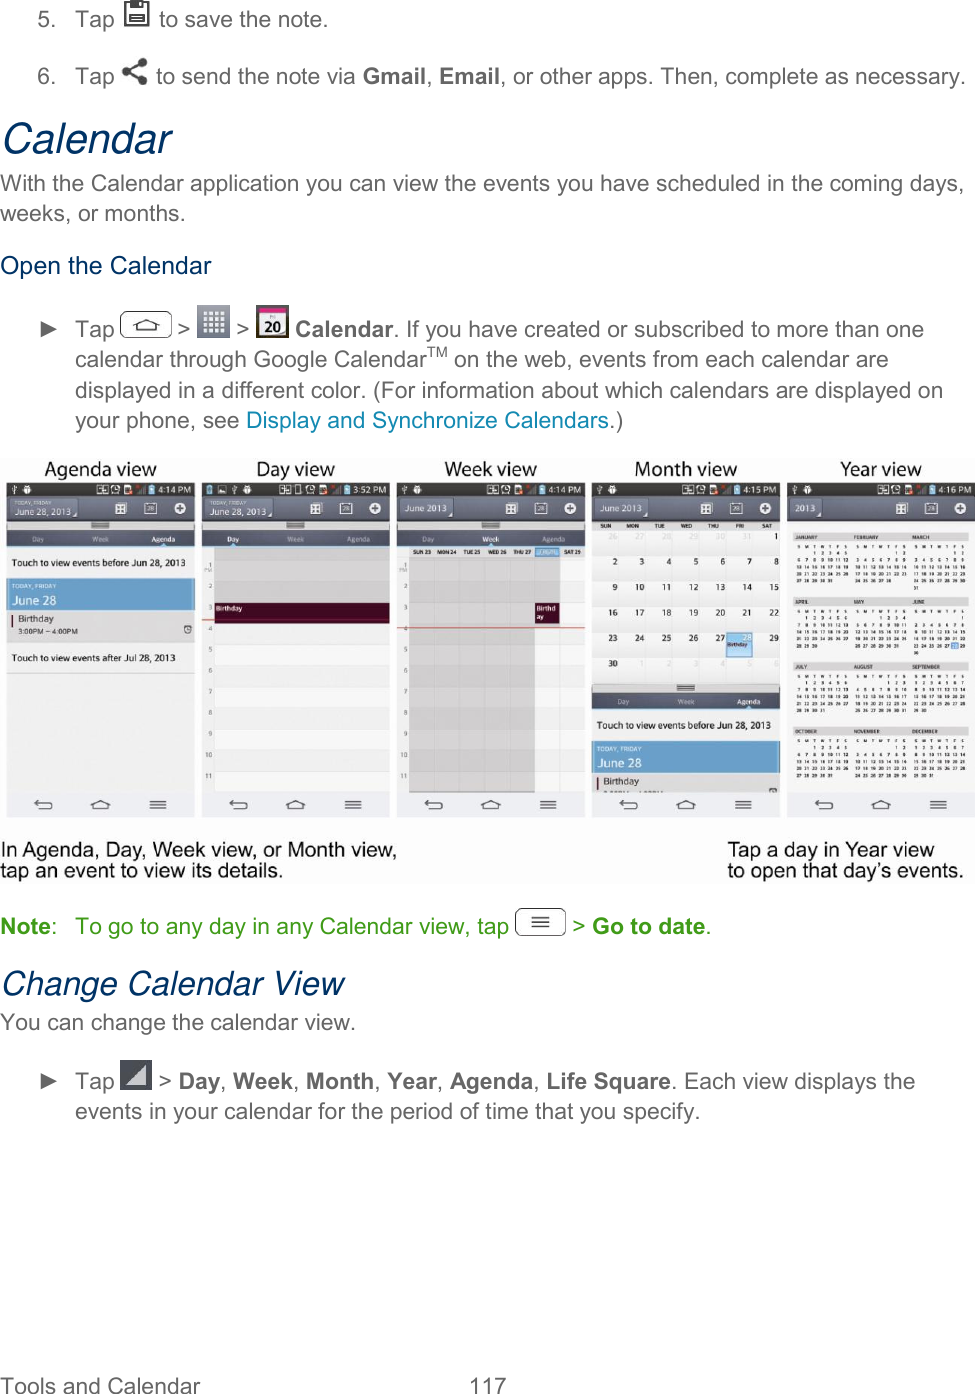  Tools and Calendar  117   5.  Tap   to save the note. 6.  Tap   to send the note via Gmail, Email, or other apps. Then, complete as necessary. Calendar With the Calendar application you can view the events you have scheduled in the coming days, weeks, or months. Open the Calendar ►  Tap   &gt;   &gt;   Calendar. If you have created or subscribed to more than one calendar through Google CalendarTM on the web, events from each calendar are displayed in a different color. (For information about which calendars are displayed on your phone, see Display and Synchronize Calendars.)  Note:   To go to any day in any Calendar view, tap   &gt; Go to date. Change Calendar View You can change the calendar view. ►  Tap   &gt; Day, Week, Month, Year, Agenda, Life Square. Each view displays the events in your calendar for the period of time that you specify.    